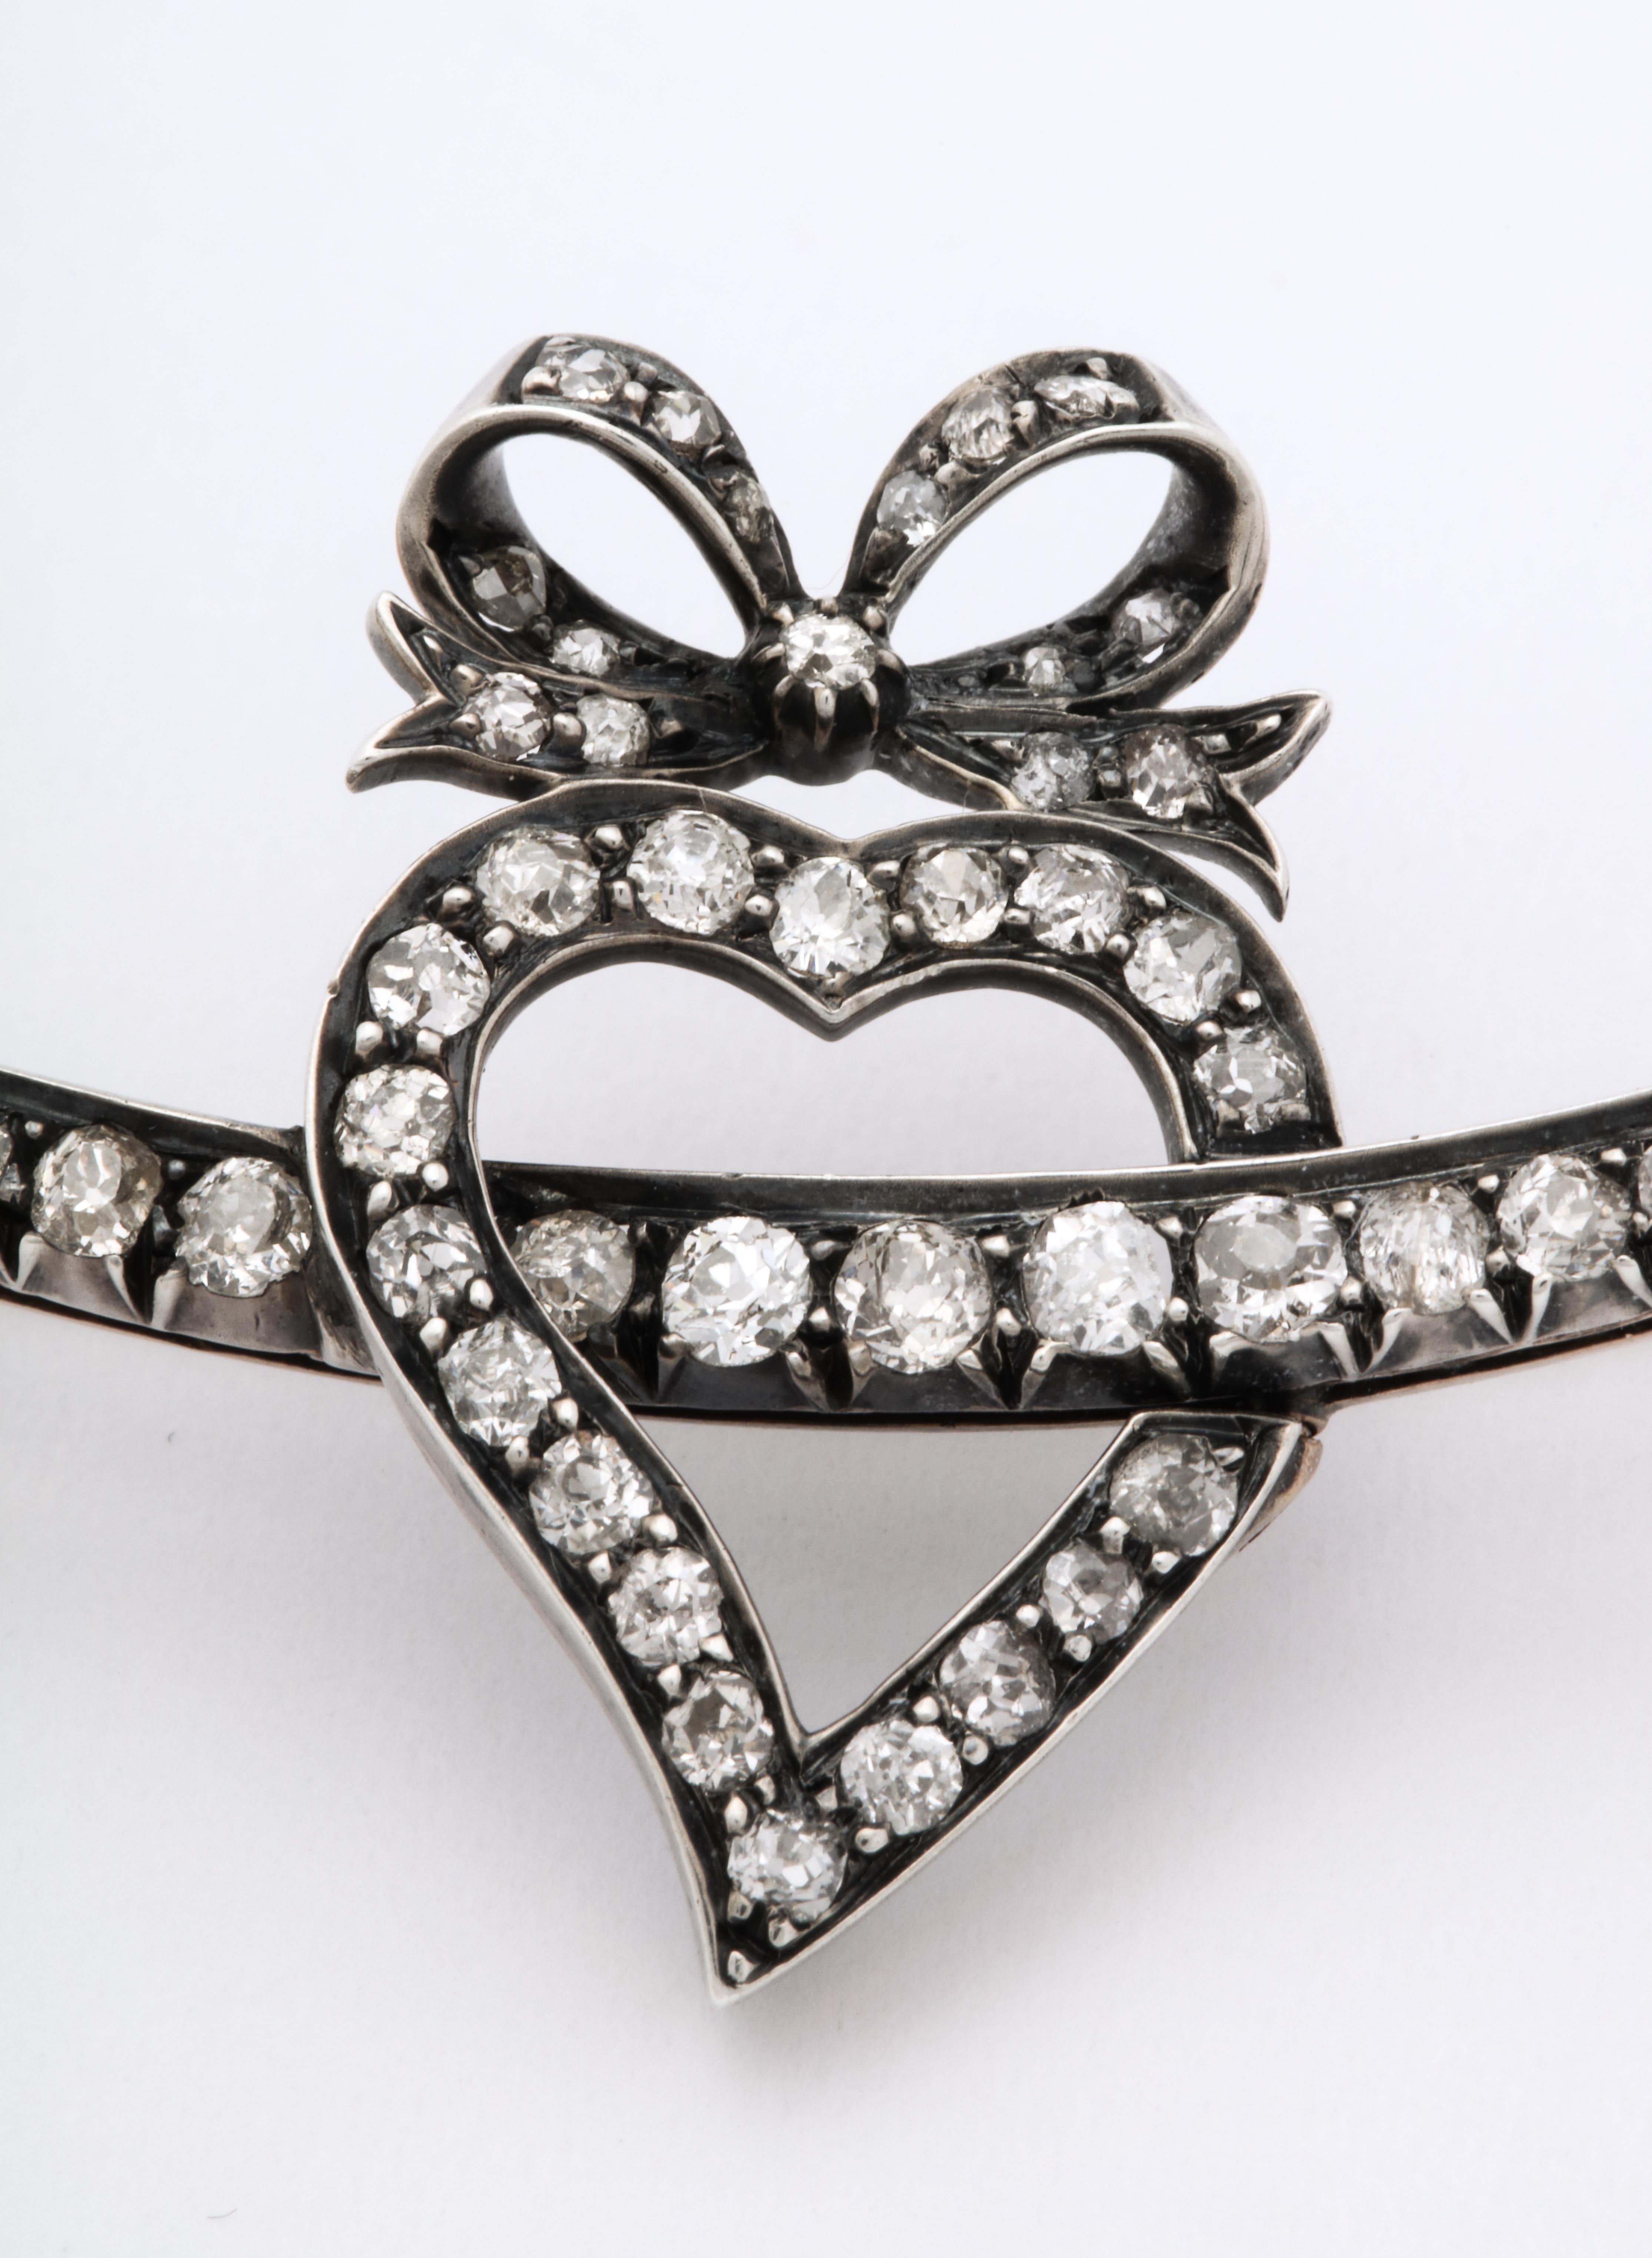 Seventy two sparkling old mine and european cut diamonds, set in 18kt gold and silver pronged settings, cover a witch's heart, crescent moon and bow in this Victorian brooch made in Great Britain c. 1860. The brooch was filled with symbolism for the